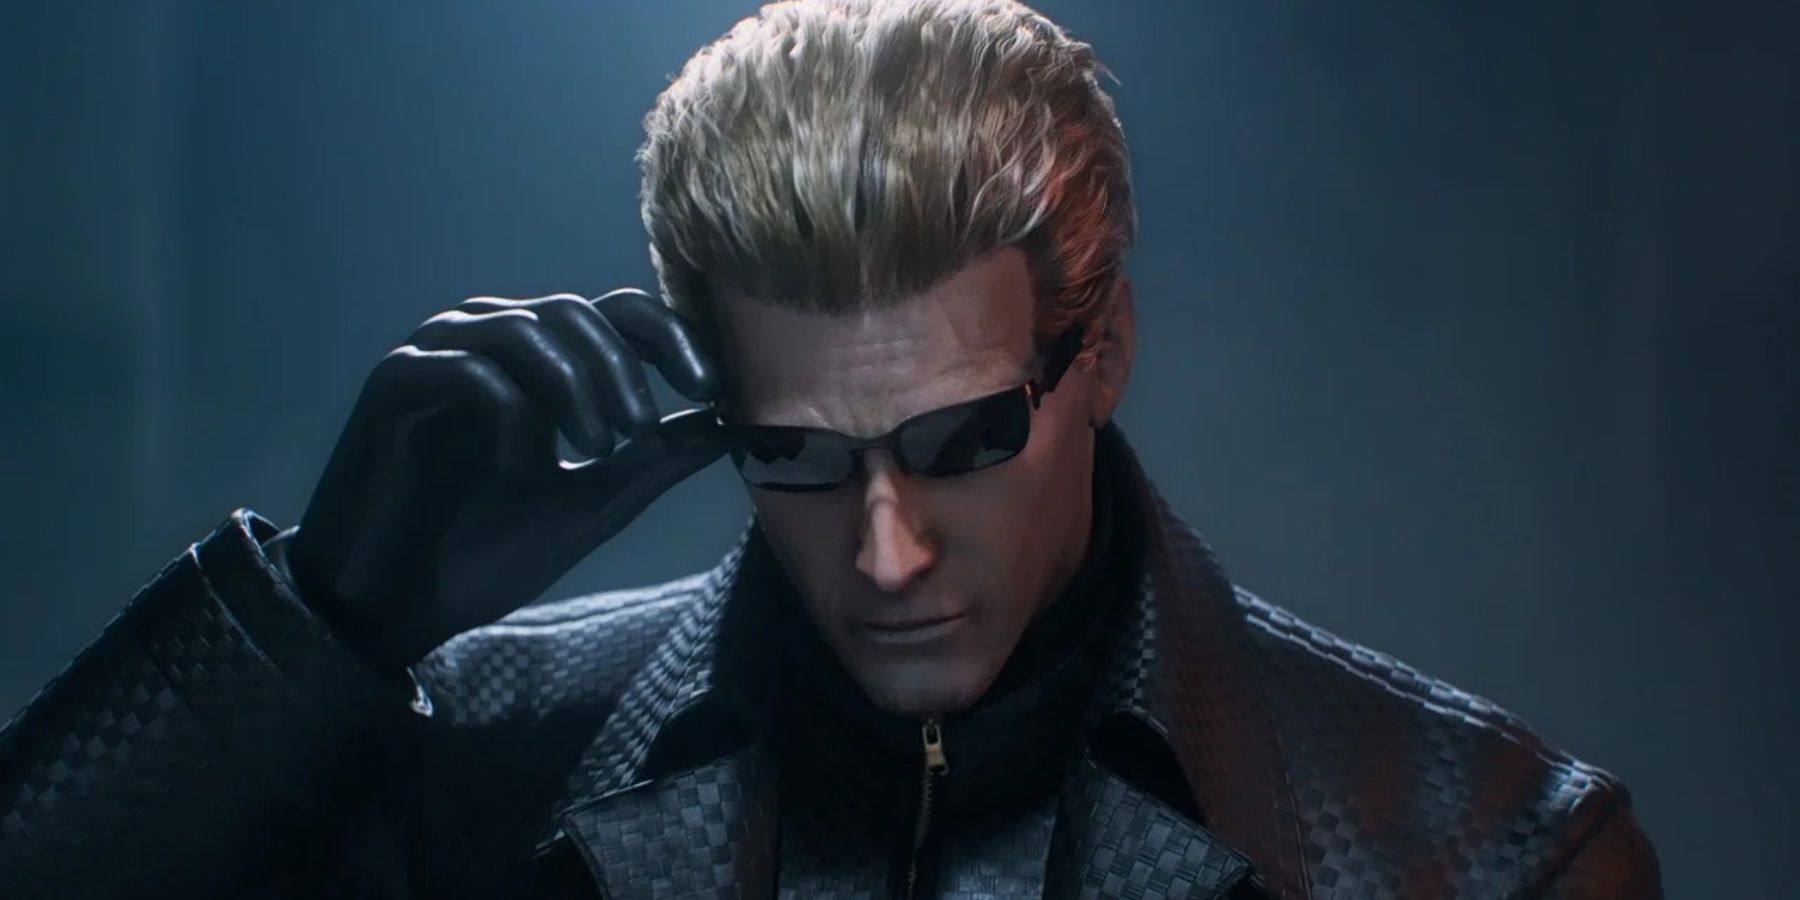 In the Resident Evil video game universe, did Albert Wesker and